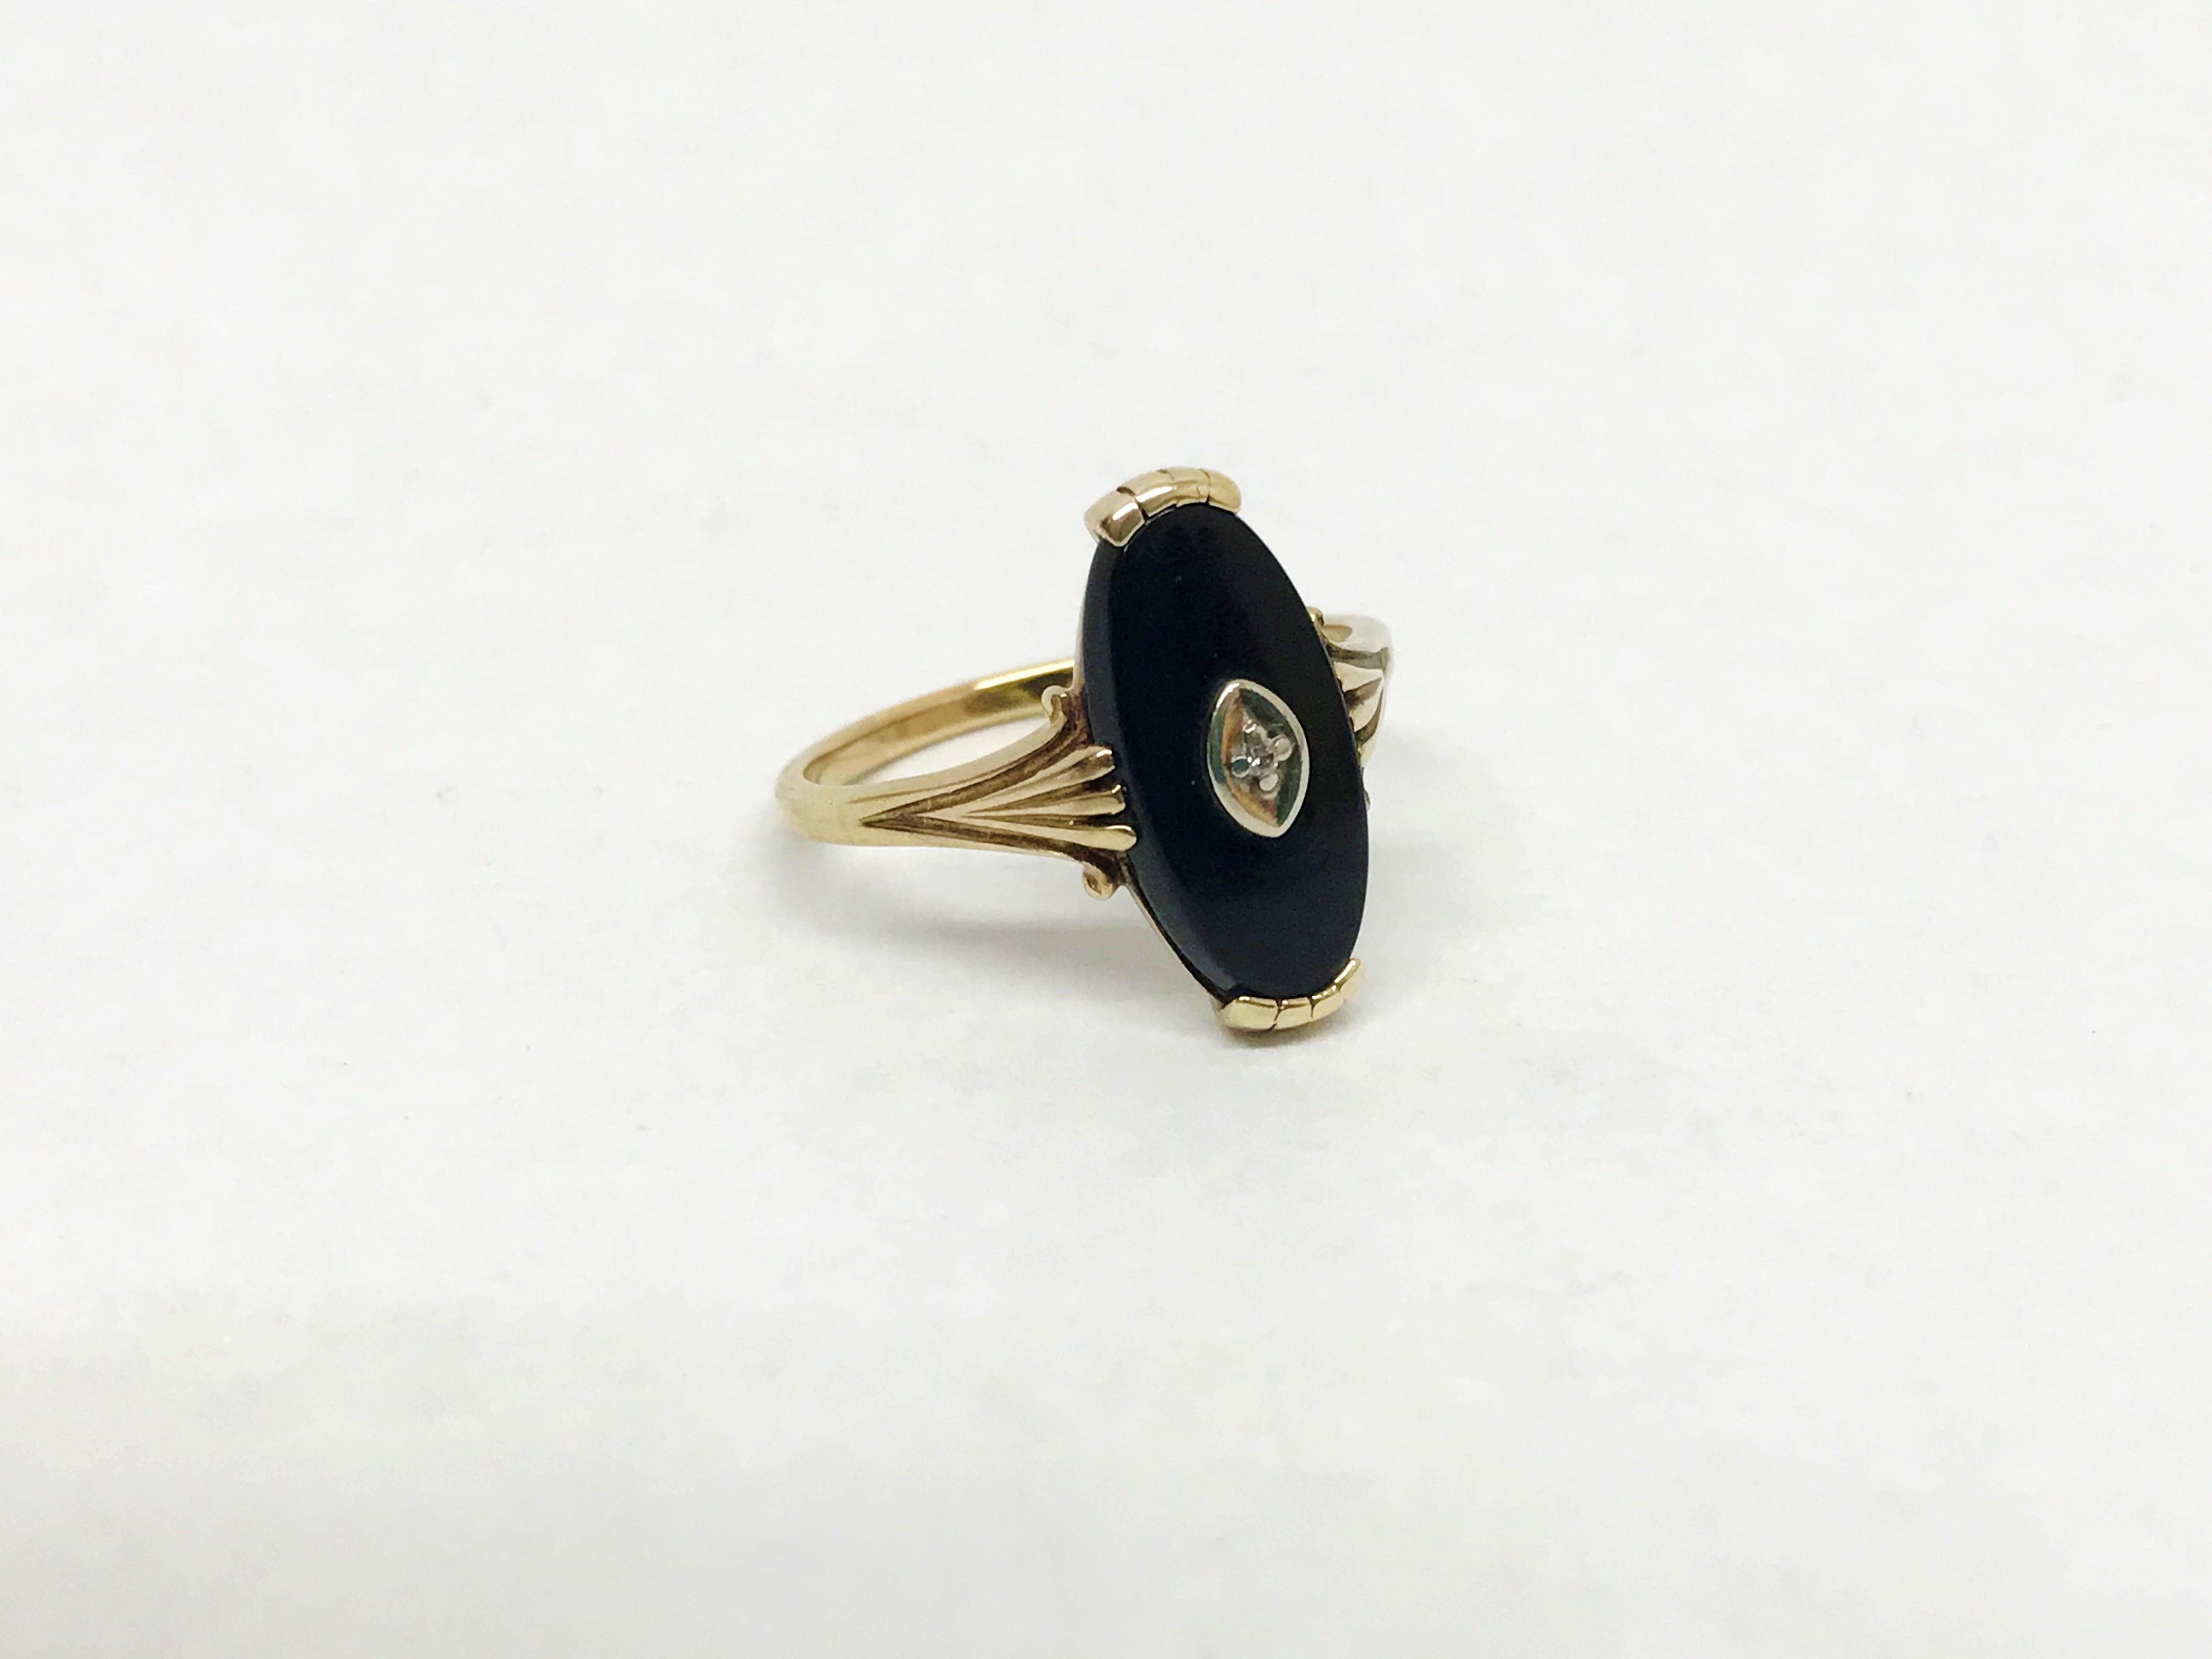 Art Deco 10K Yellow Gold Black Onyx & Diamond Ring – Hers and His